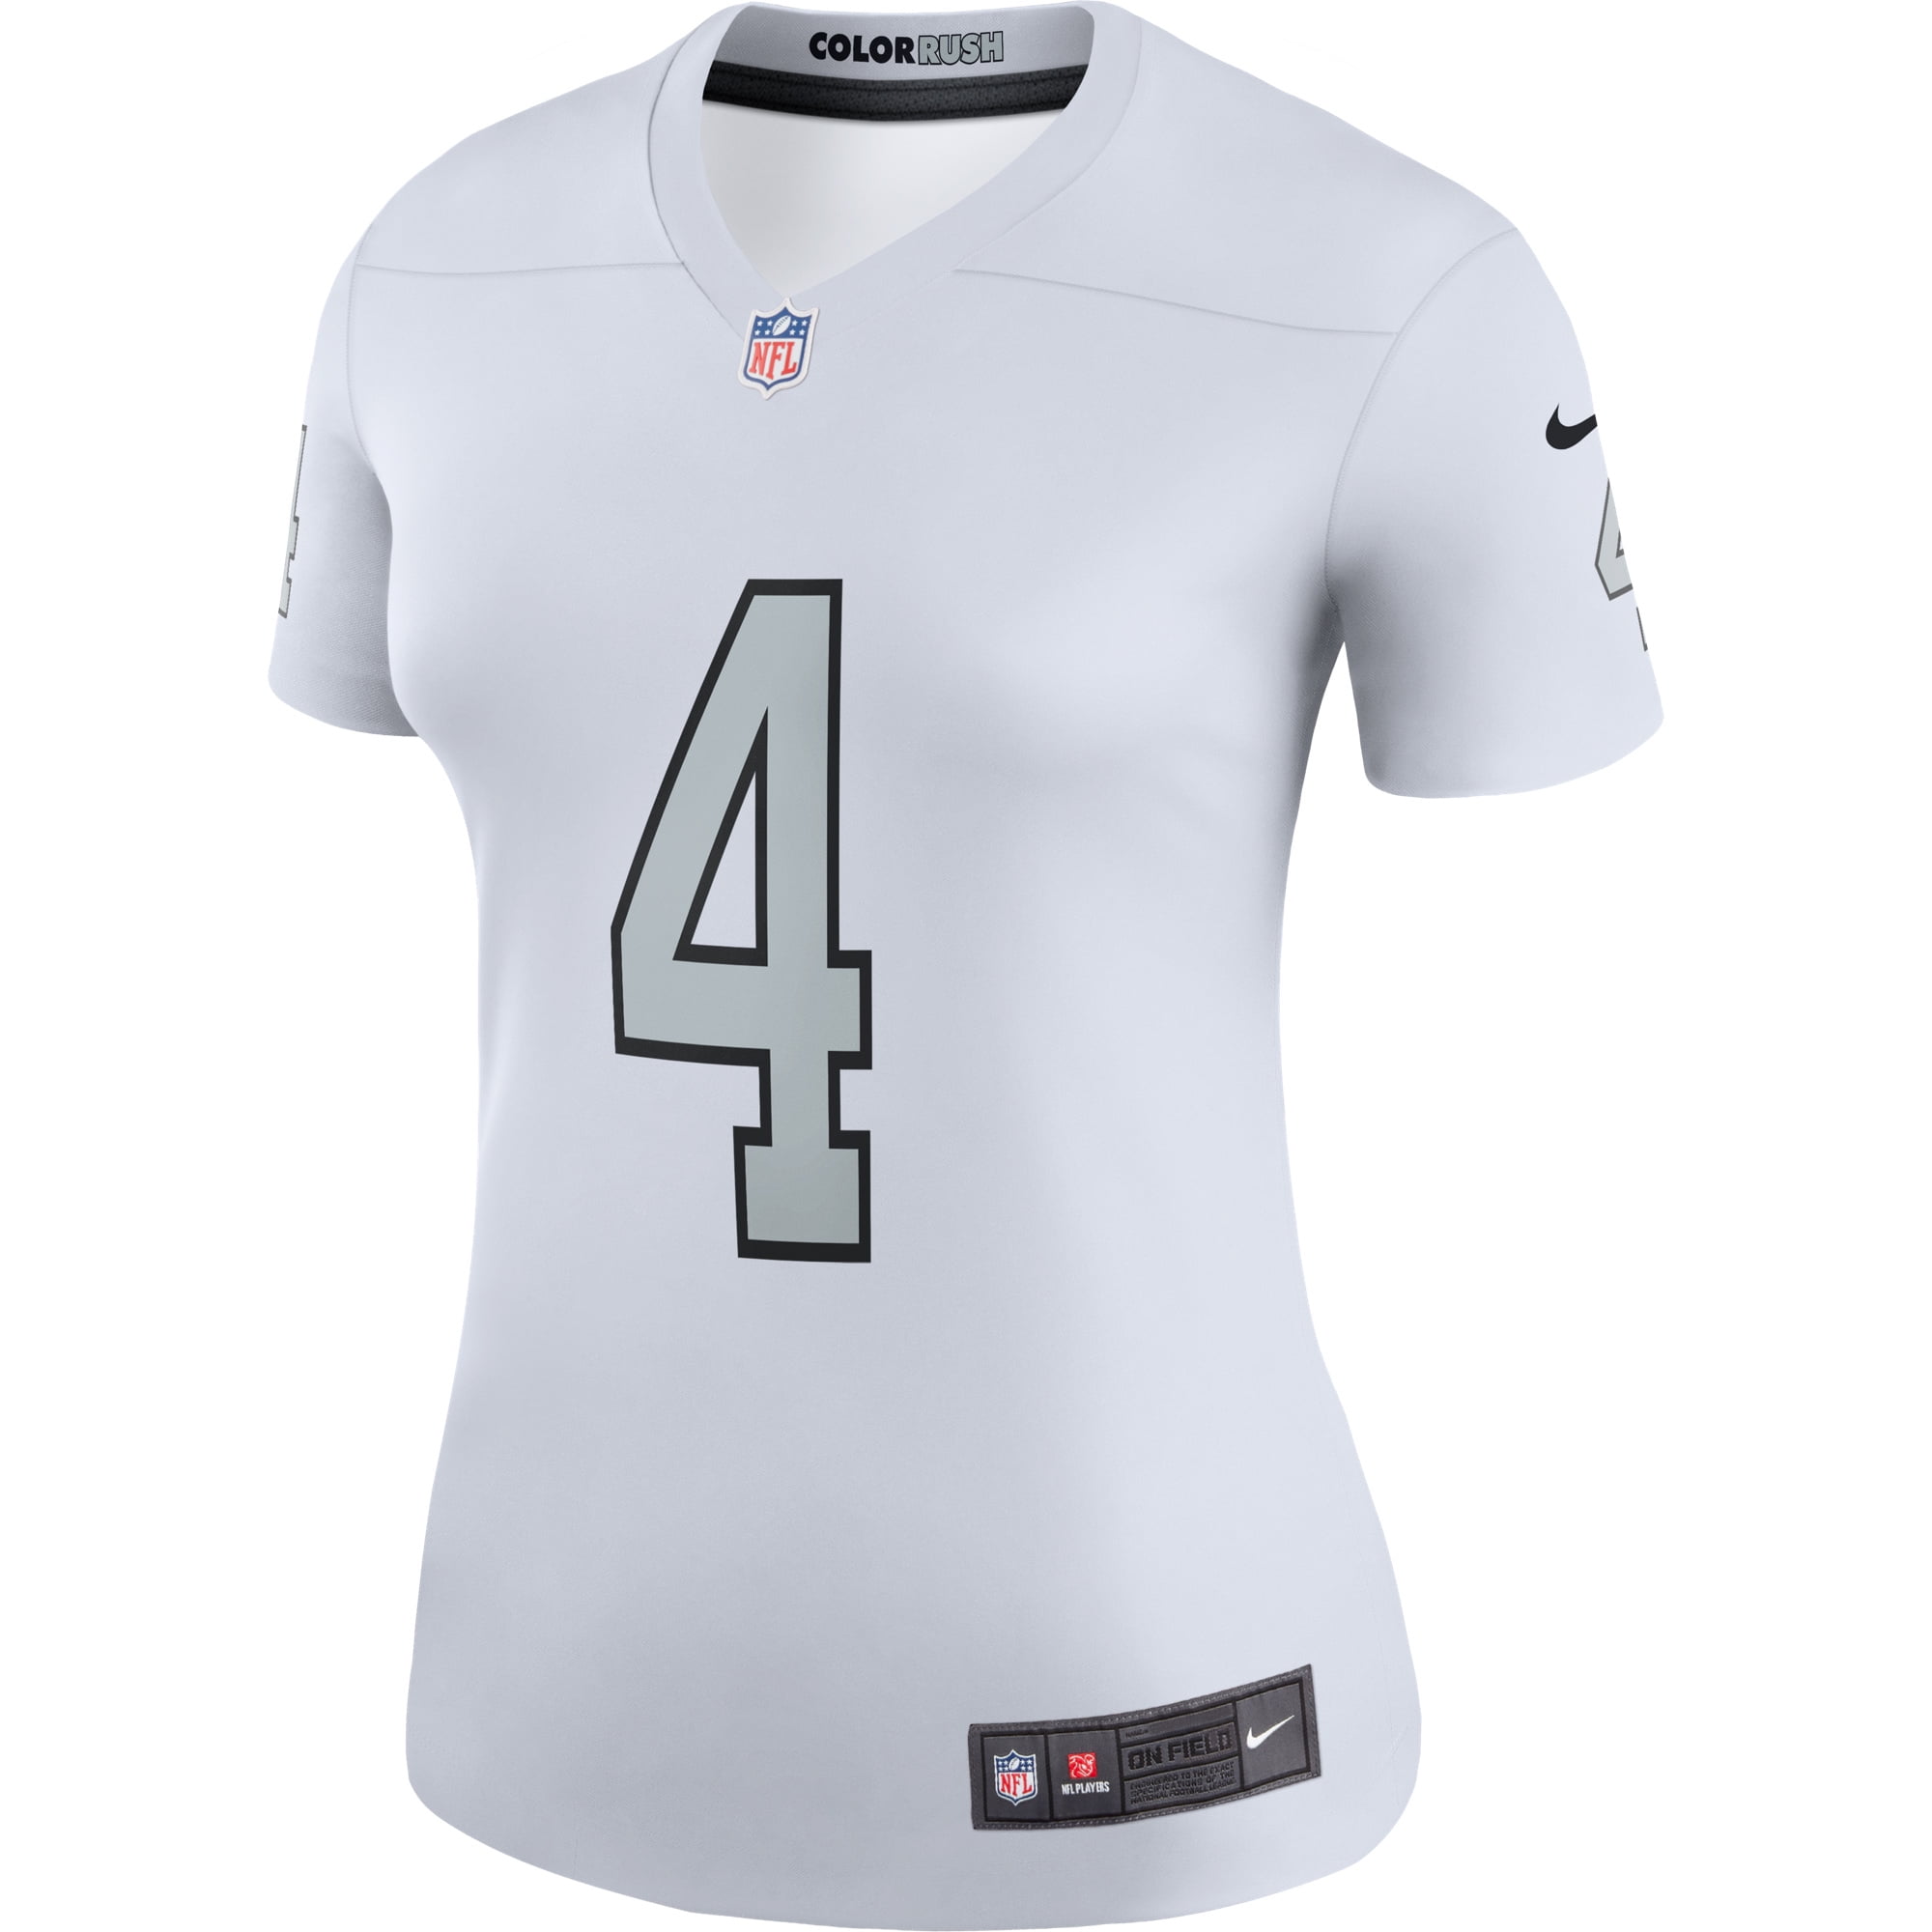 nfl raiders color rush jersey